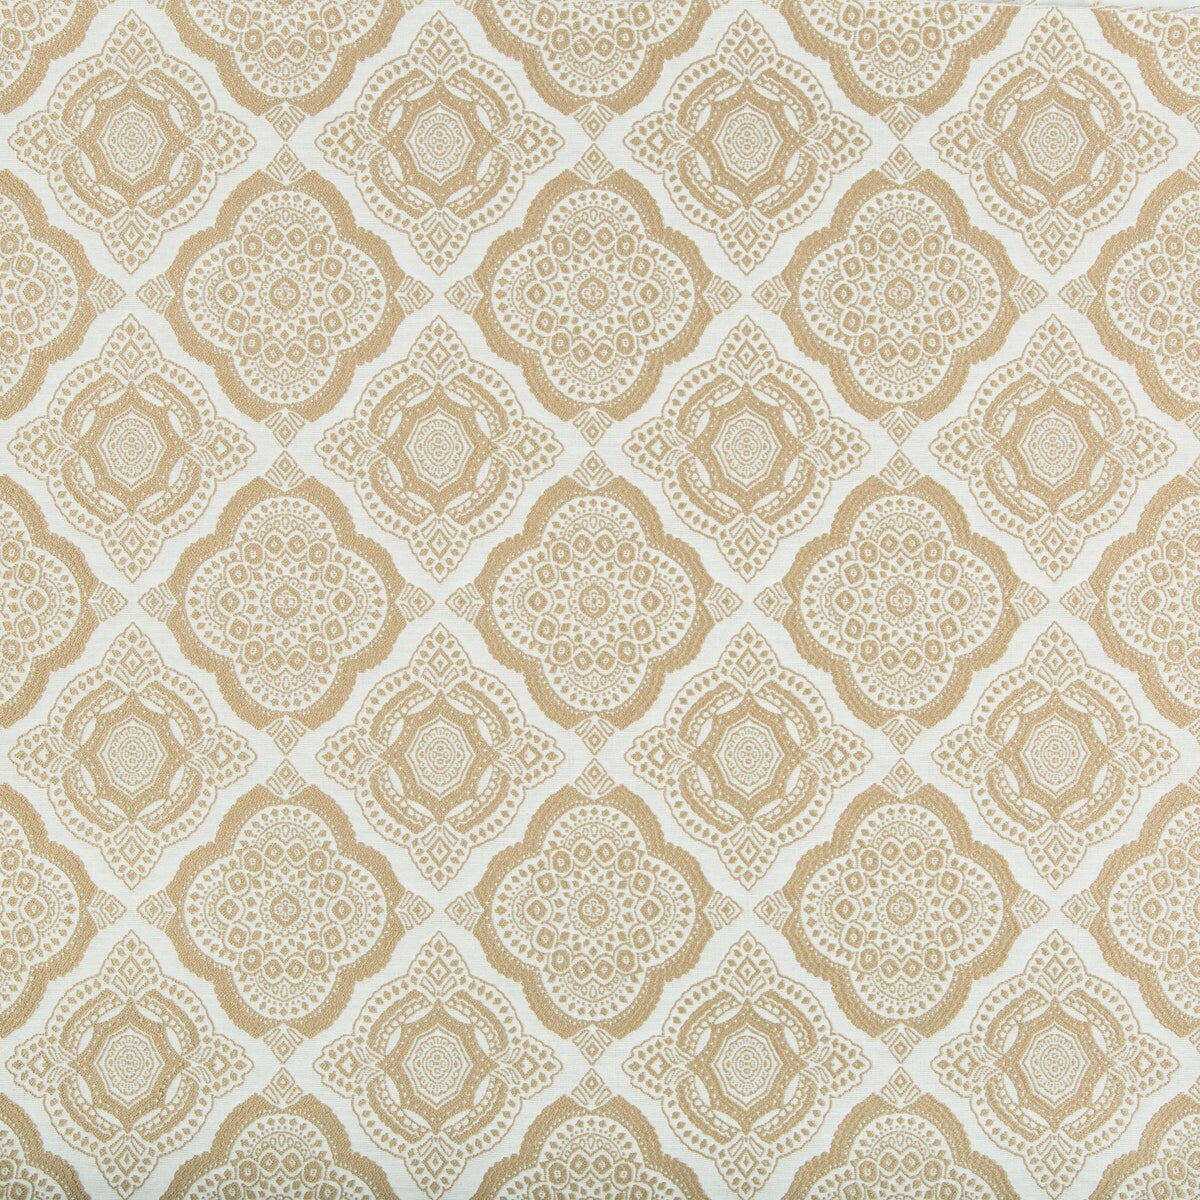 Kravet Design fabric in 34704-116 color - pattern 34704.116.0 - by Kravet Design in the Performance Crypton Home collection